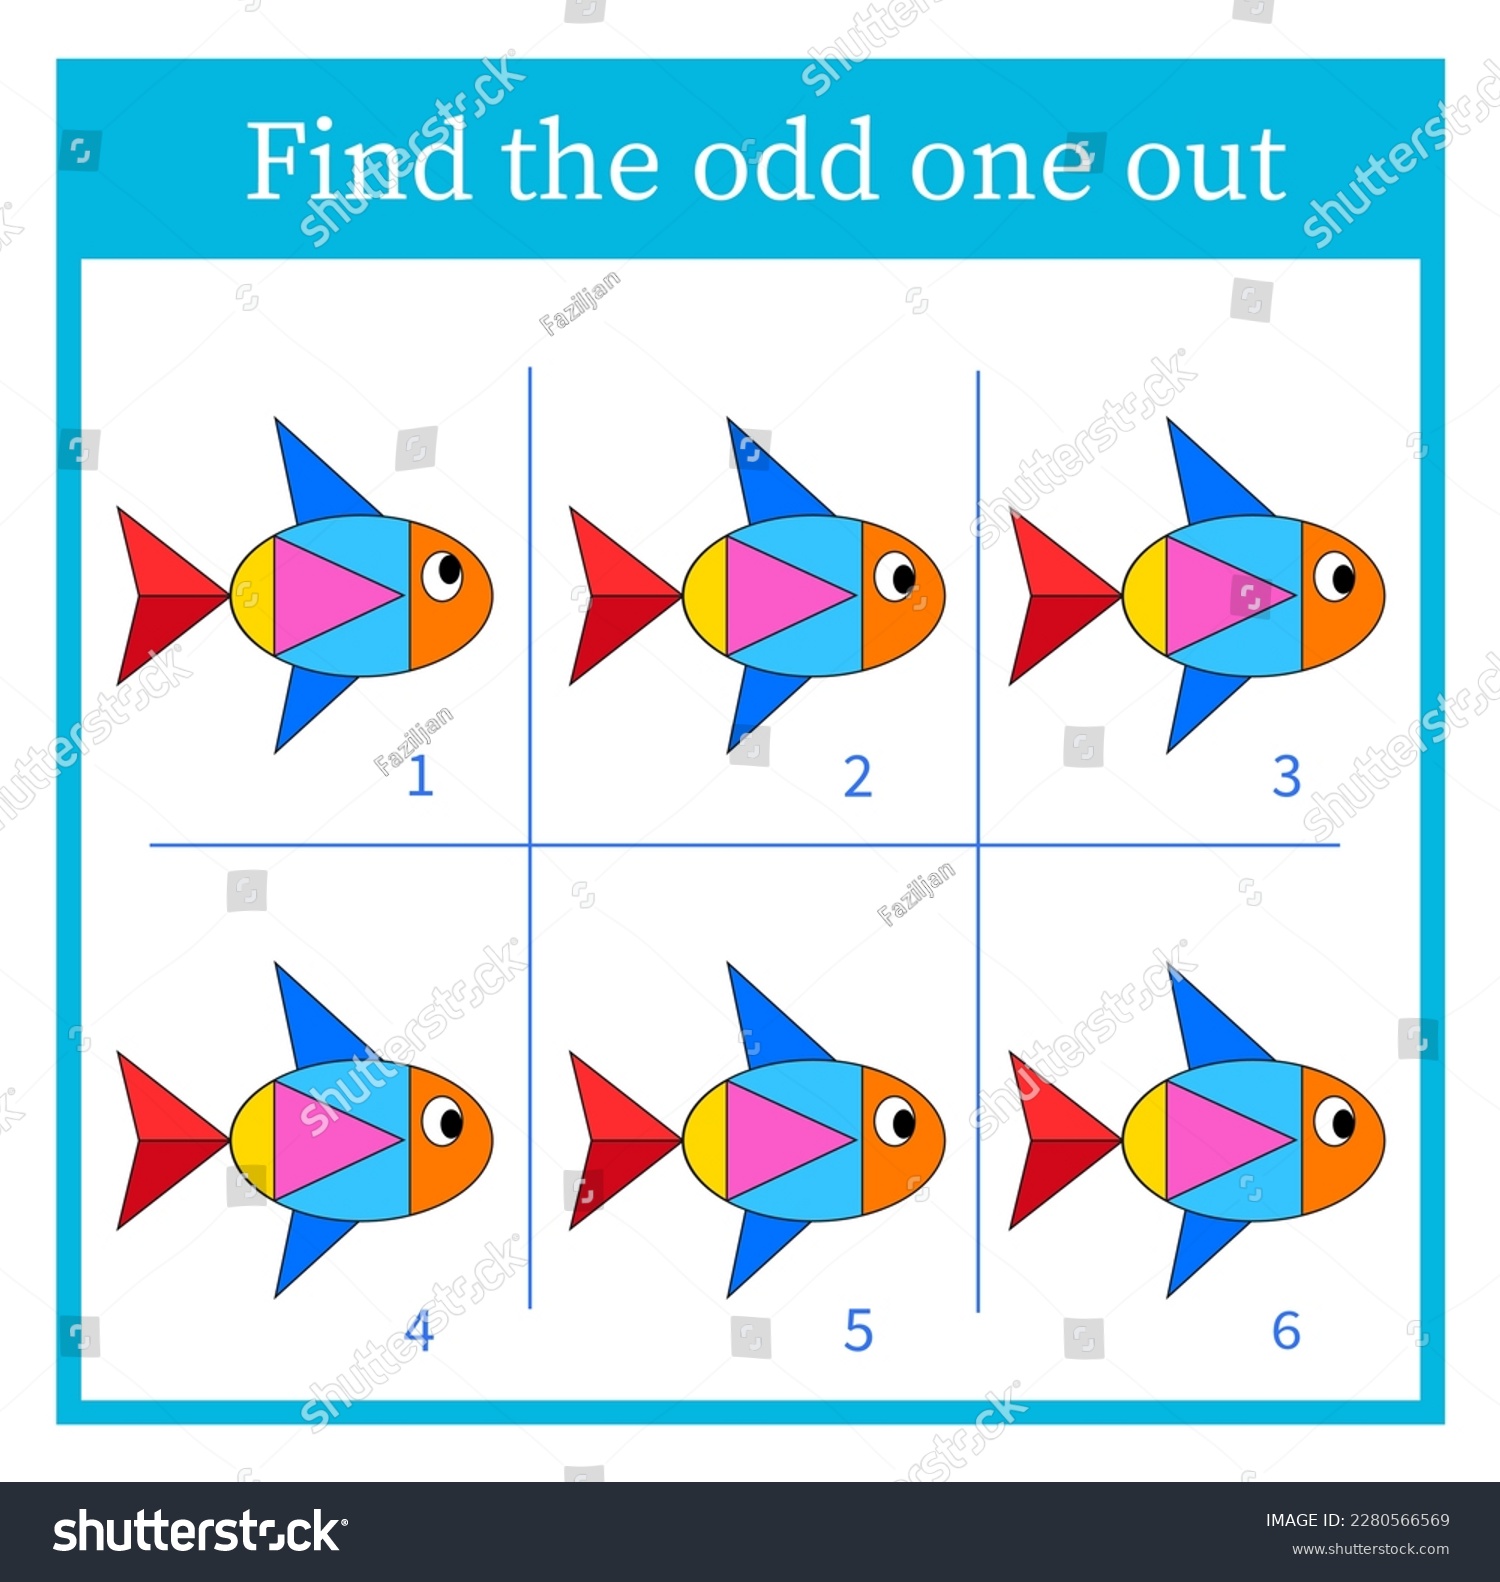 Find the odd one out. Logic puzzle for children. Kids activity sheet. Vector illustration. #2280566569